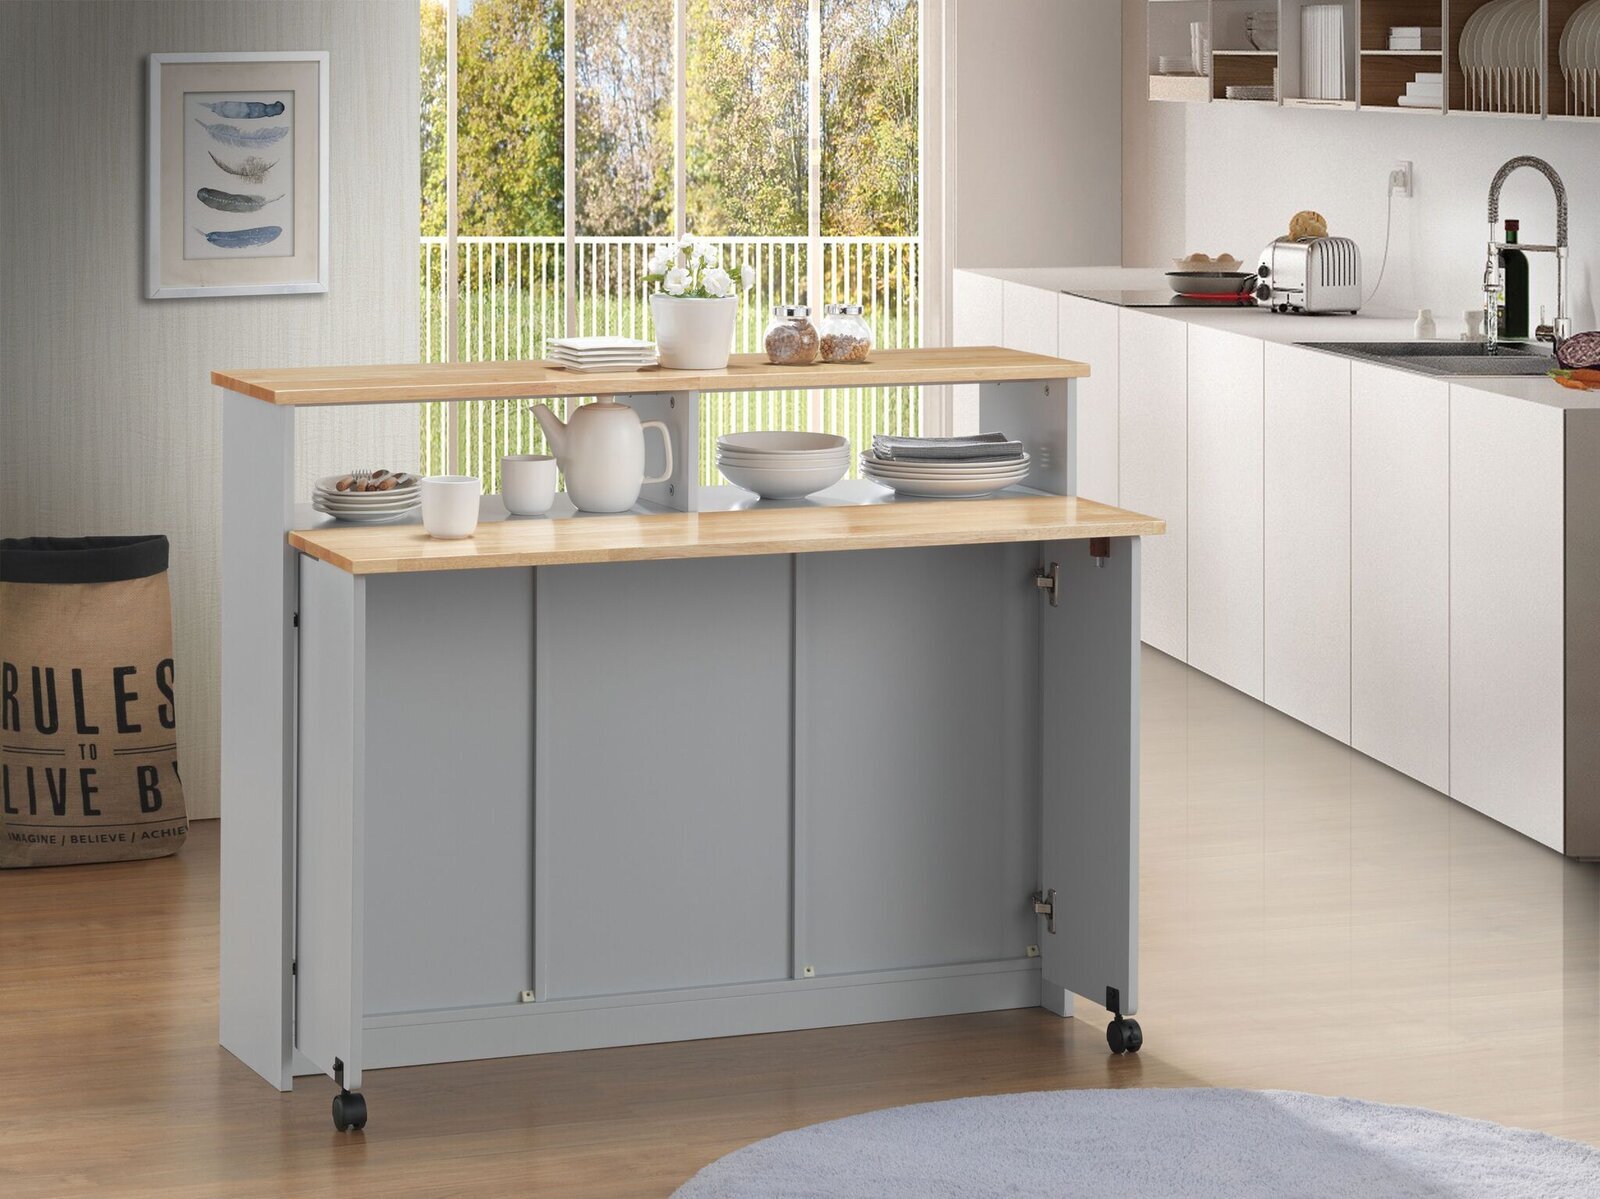 Portable Kitchen Islands With Breakfast Bar   Ideas on Foter